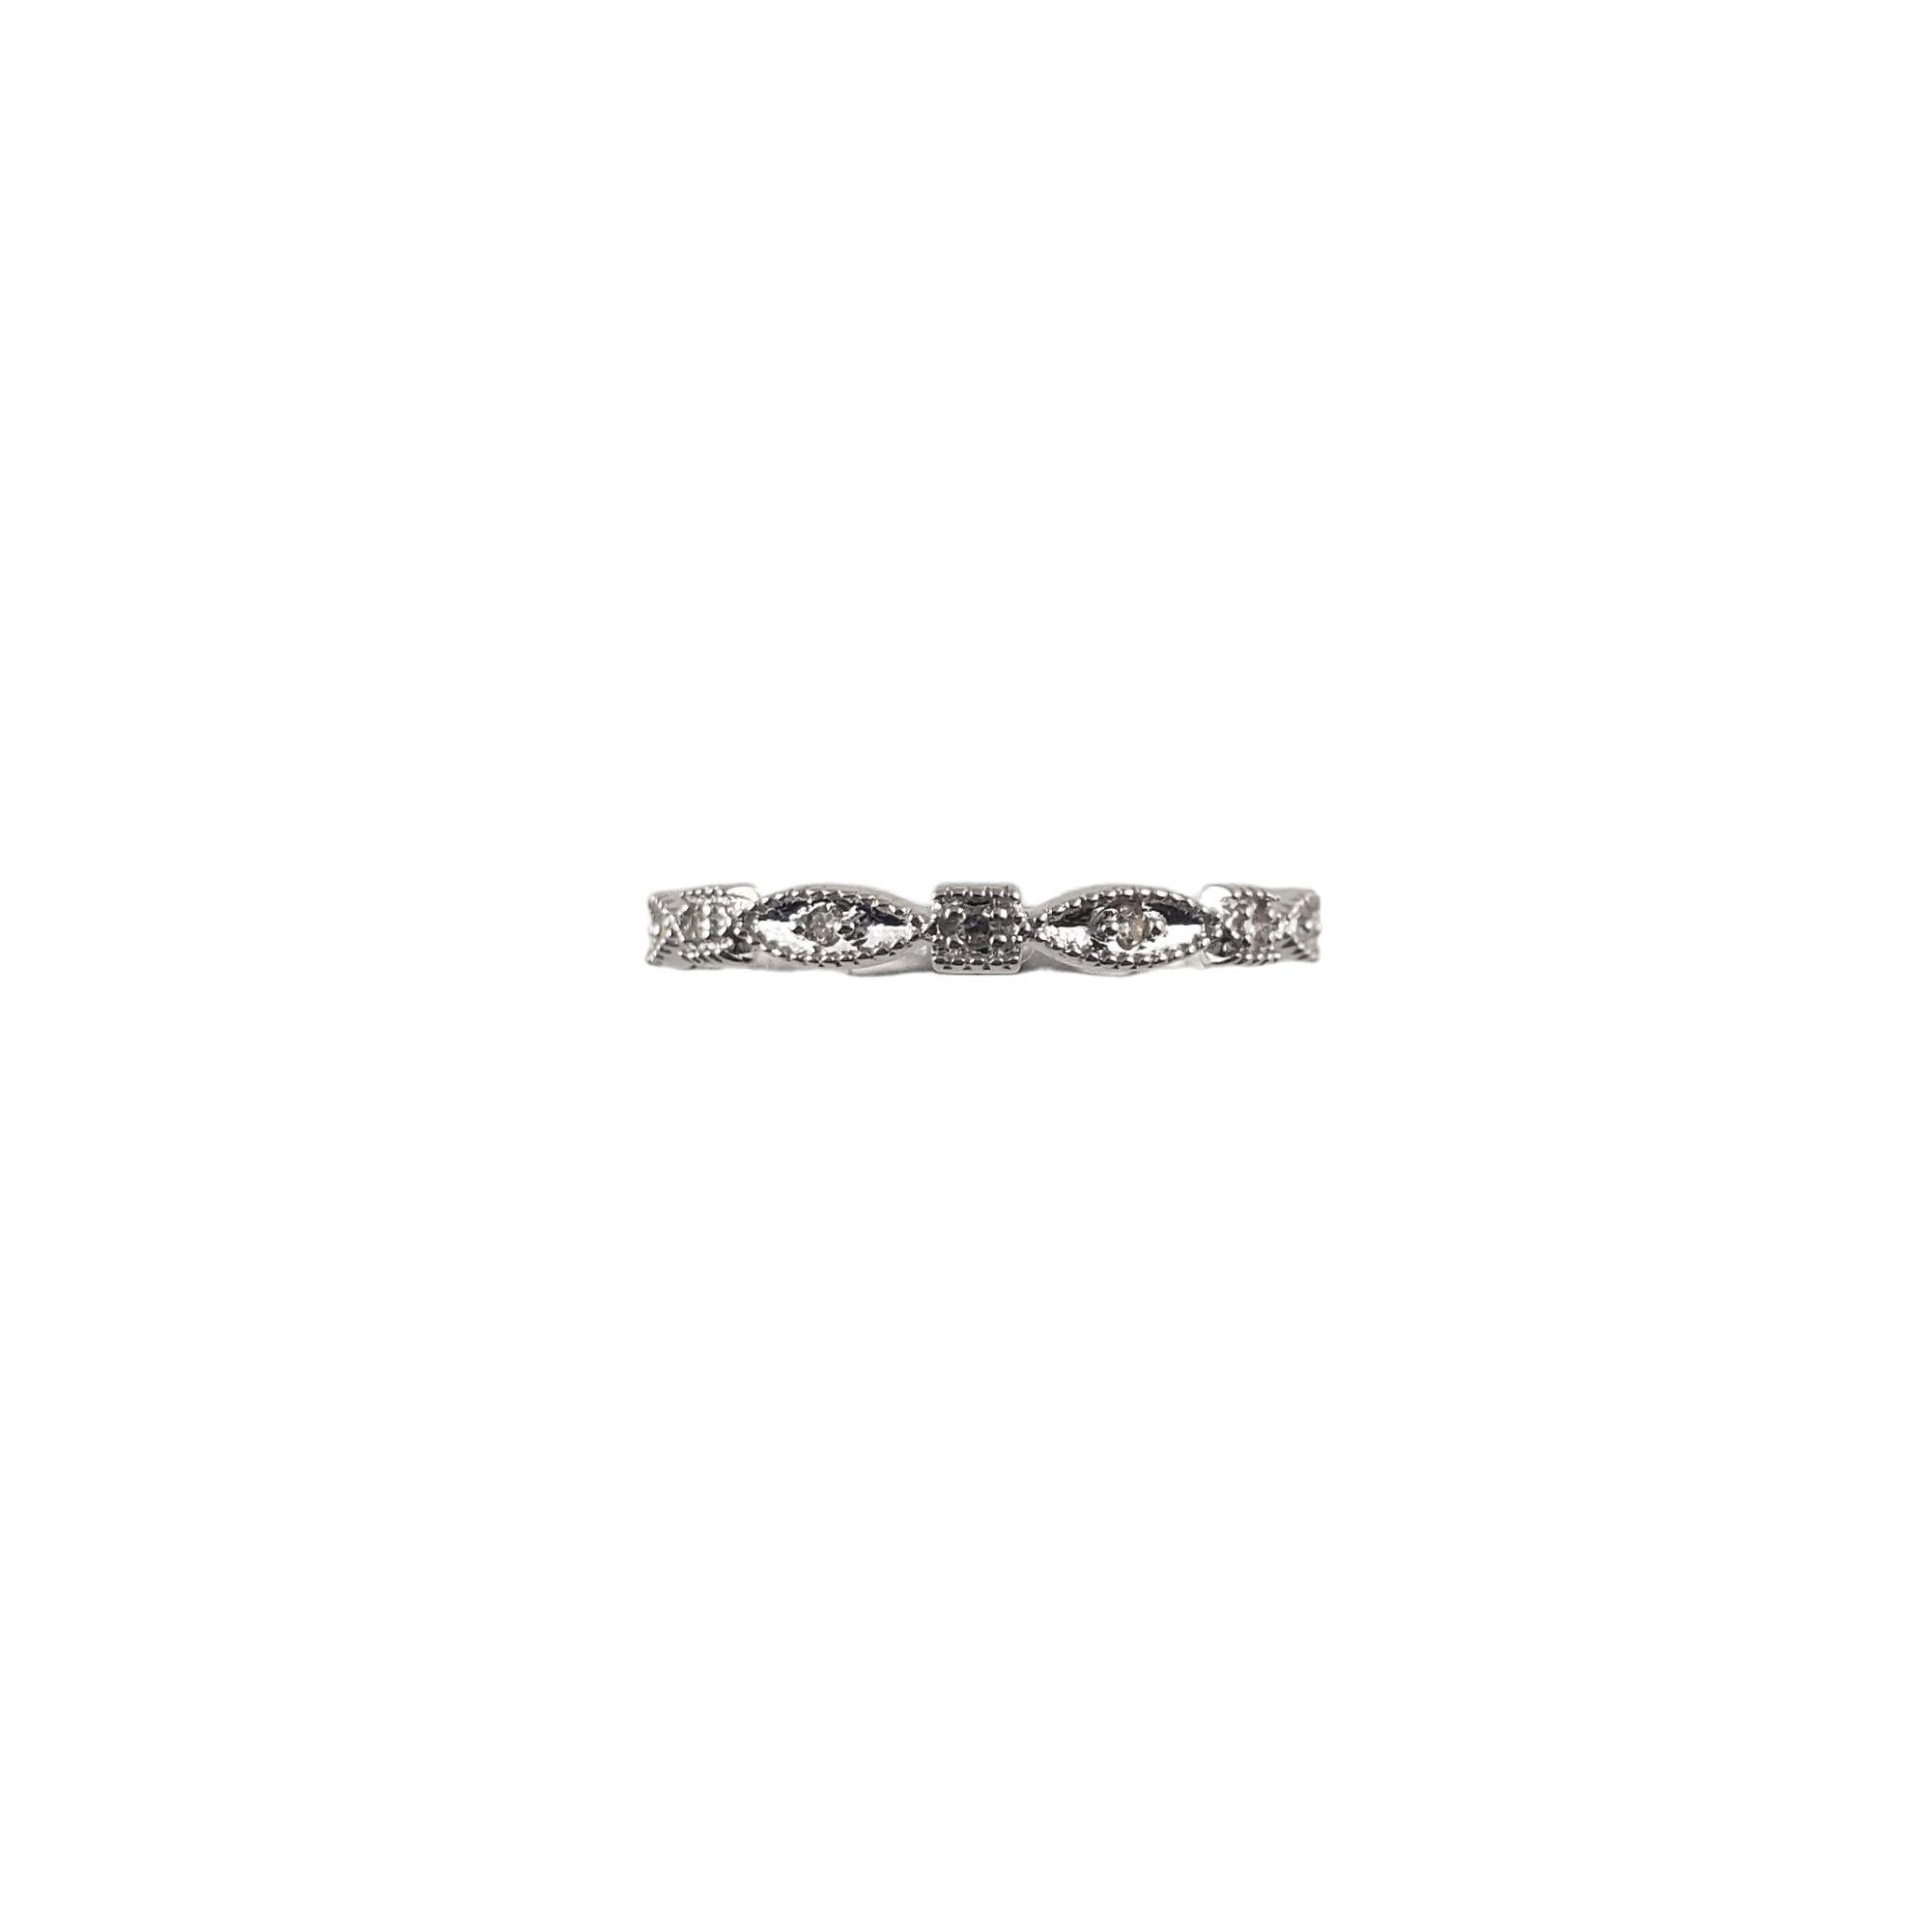 Vintage 14 Karat White Gold and Diamond Band Ring Size 7.25-

This stunning band features seven round single cut diamonds set in beautifully detailed 14K white gold. Width: 2.5 mm.

Approximate total diamond weight: .05 ct.

Diamond clarity: